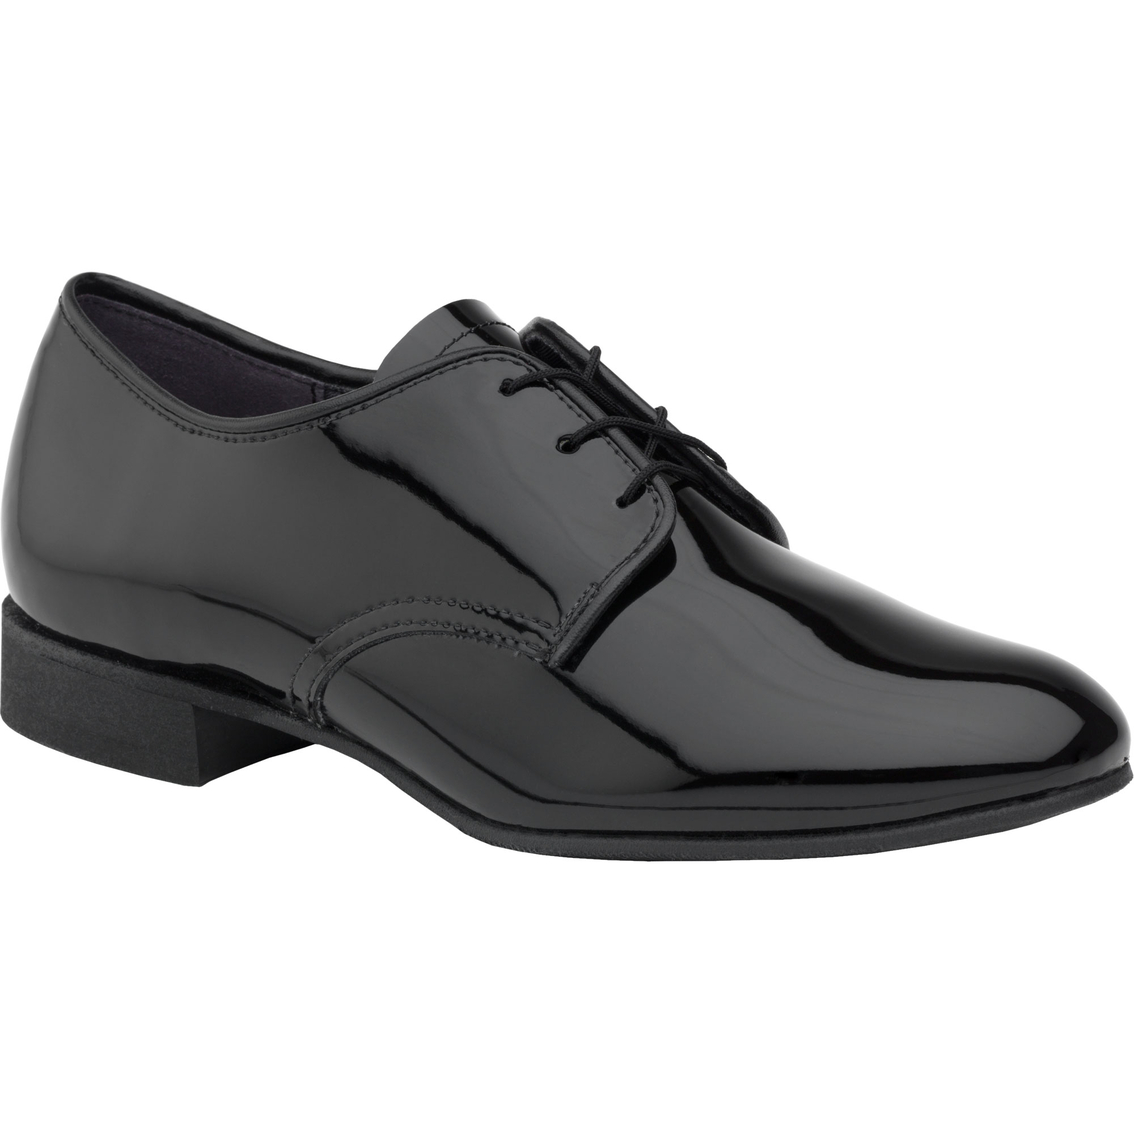 white military dress shoes